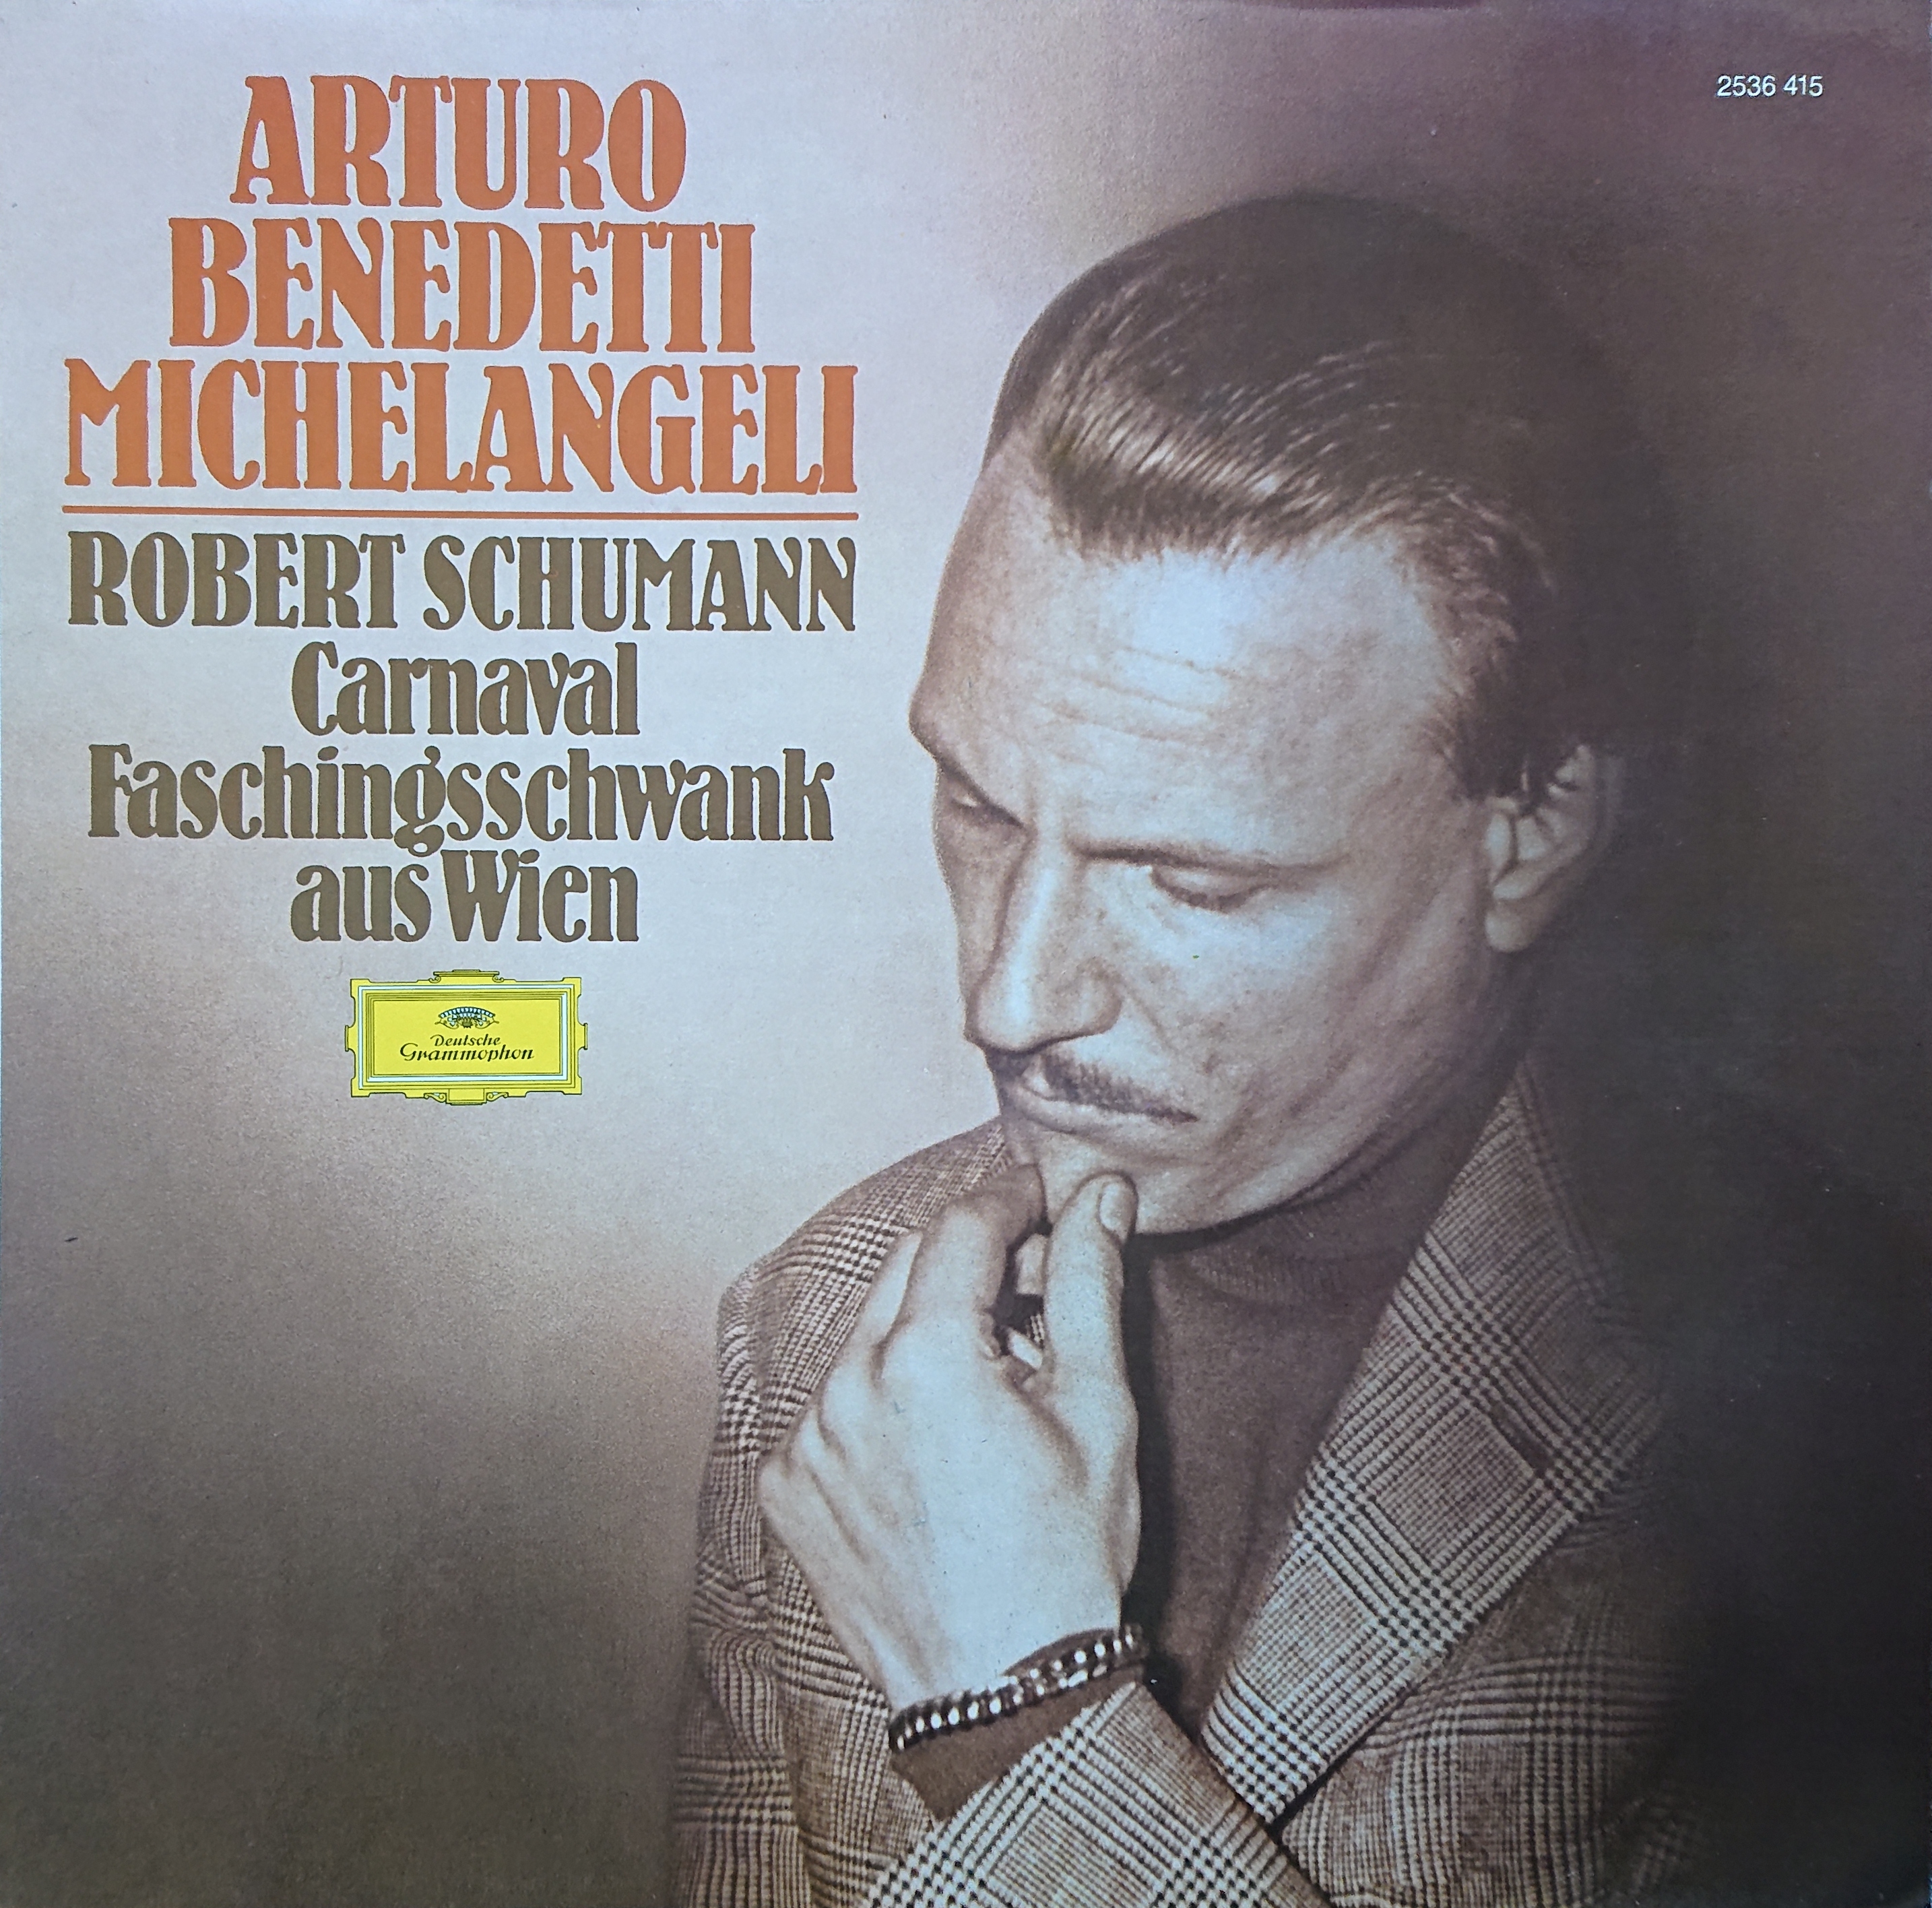 Picture of Carnaval op. 9 by artist Robert Schumann / Arturo Benedetti Michelangeli from the BBC albums - Records and Tapes library